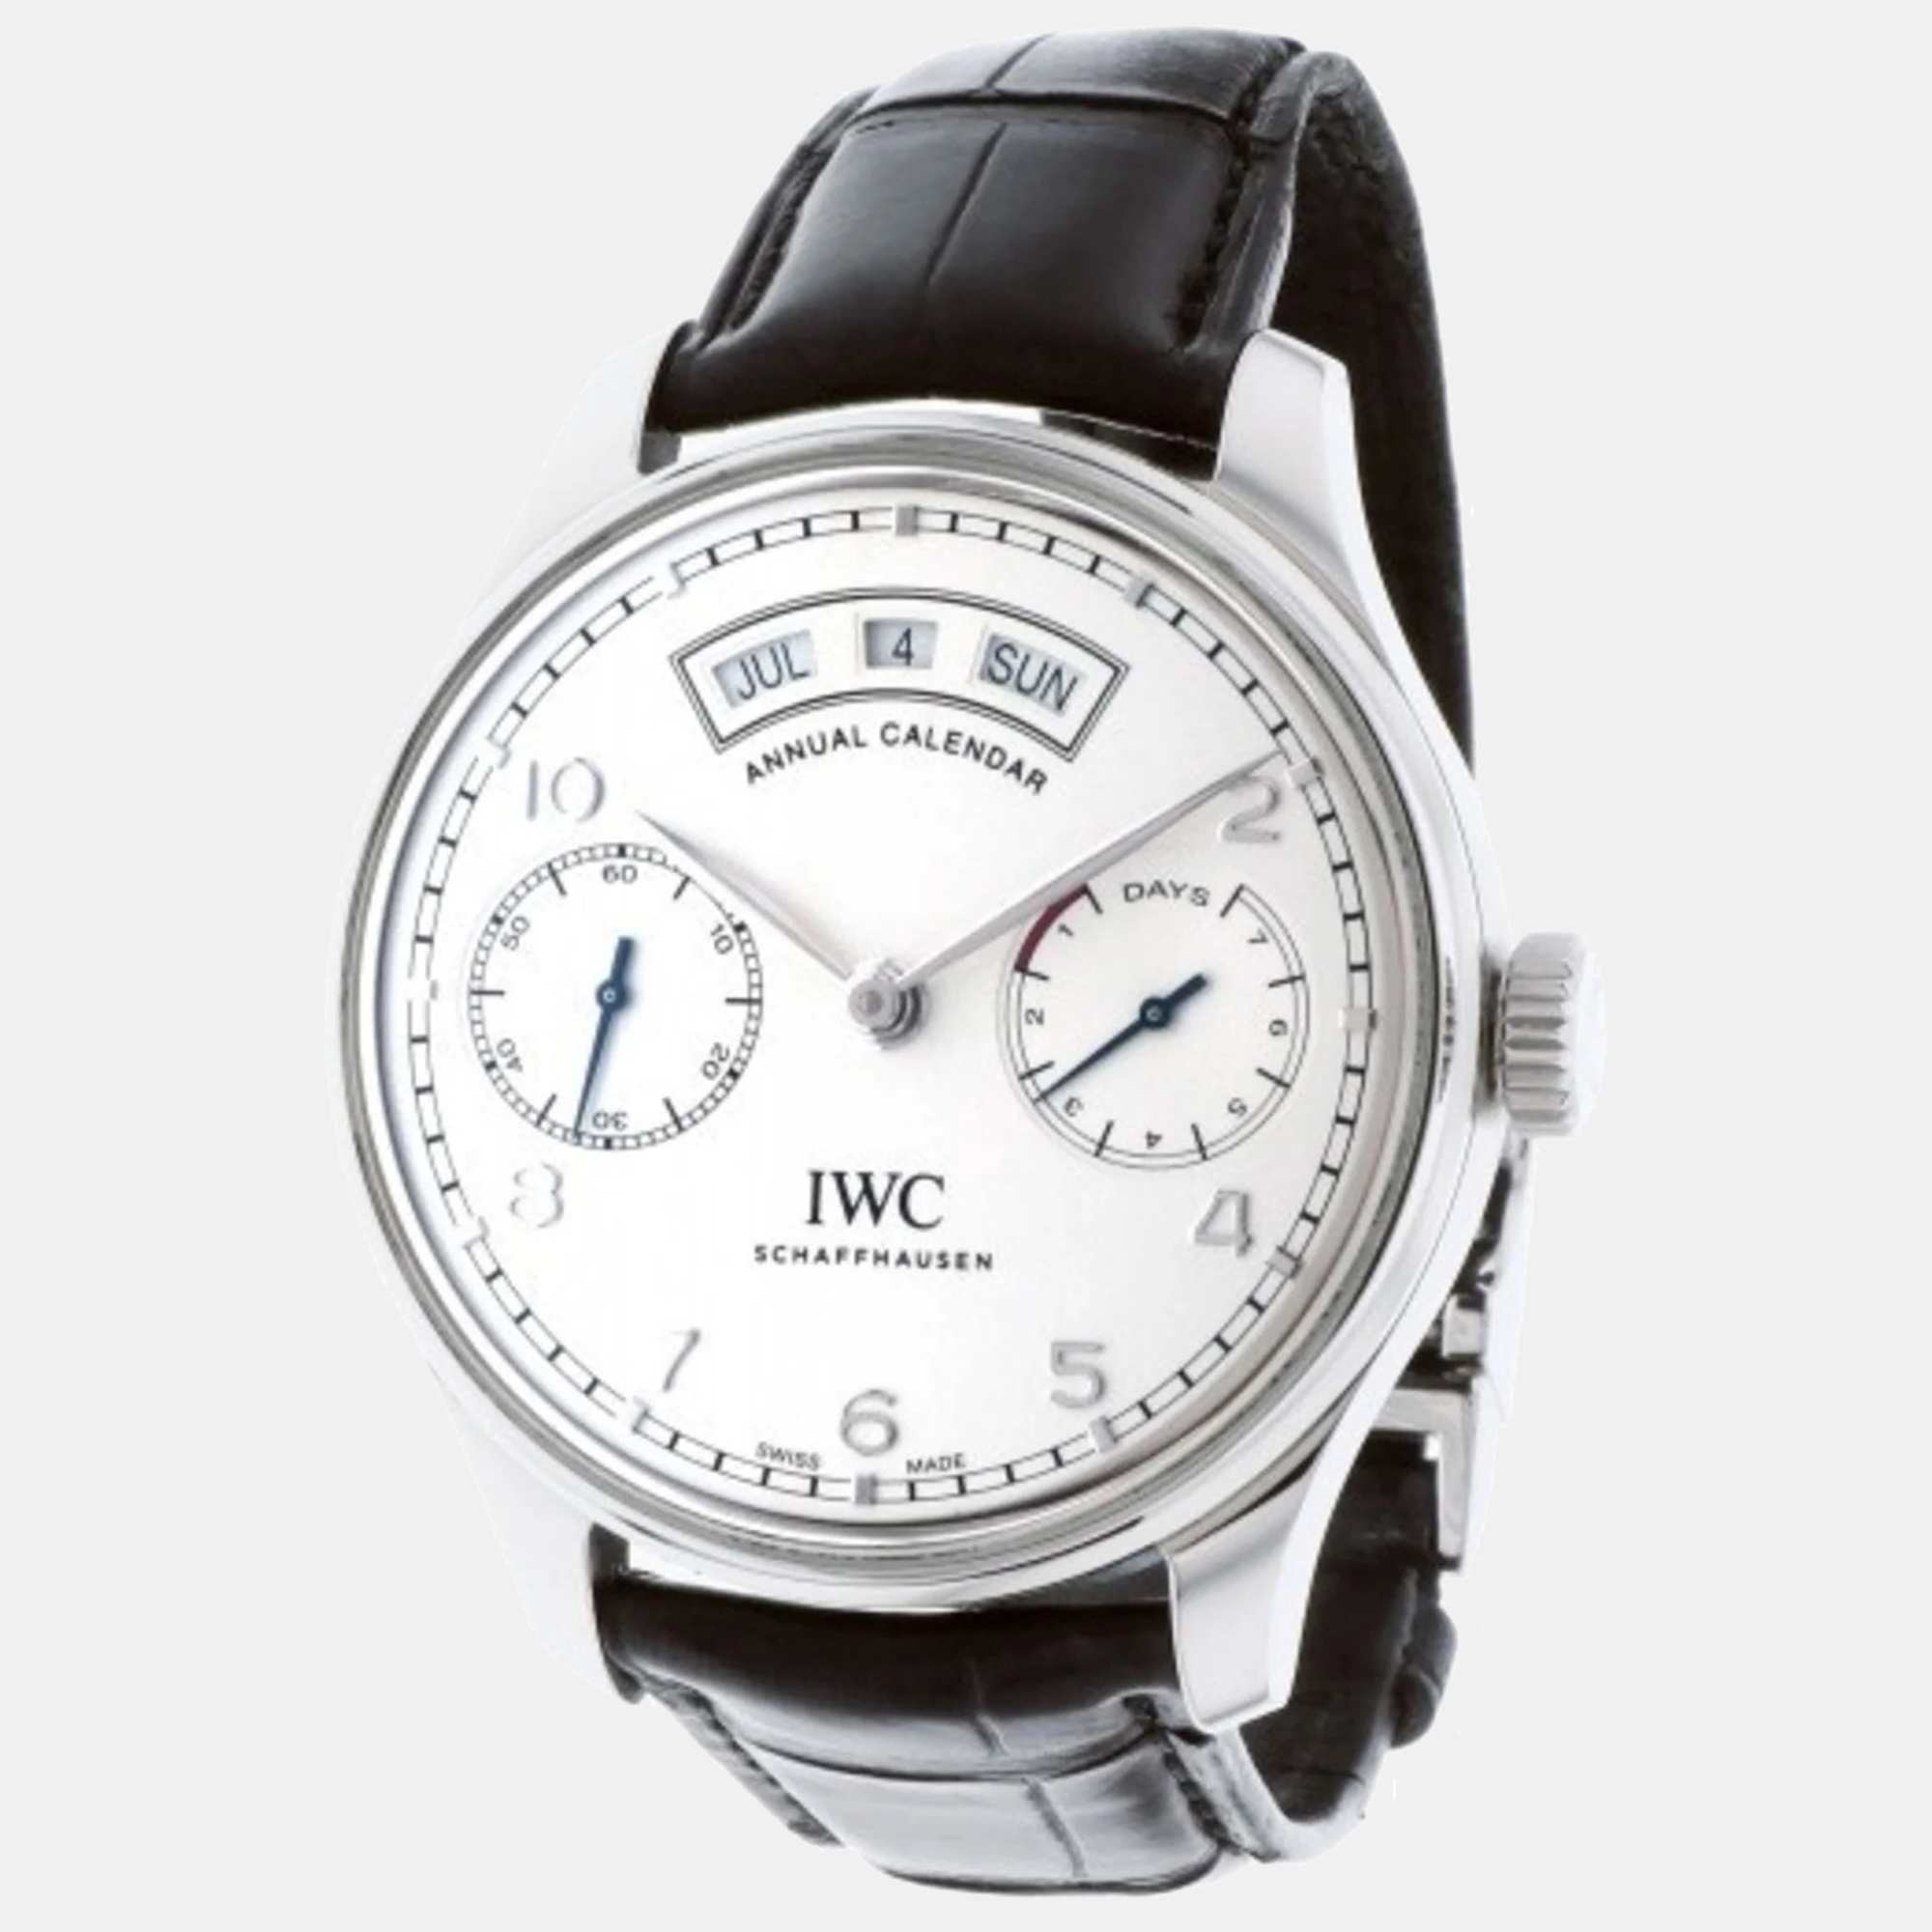 Iwc silver stainless steel portugieser iw503501 automatic men's wristwatch 44 mm